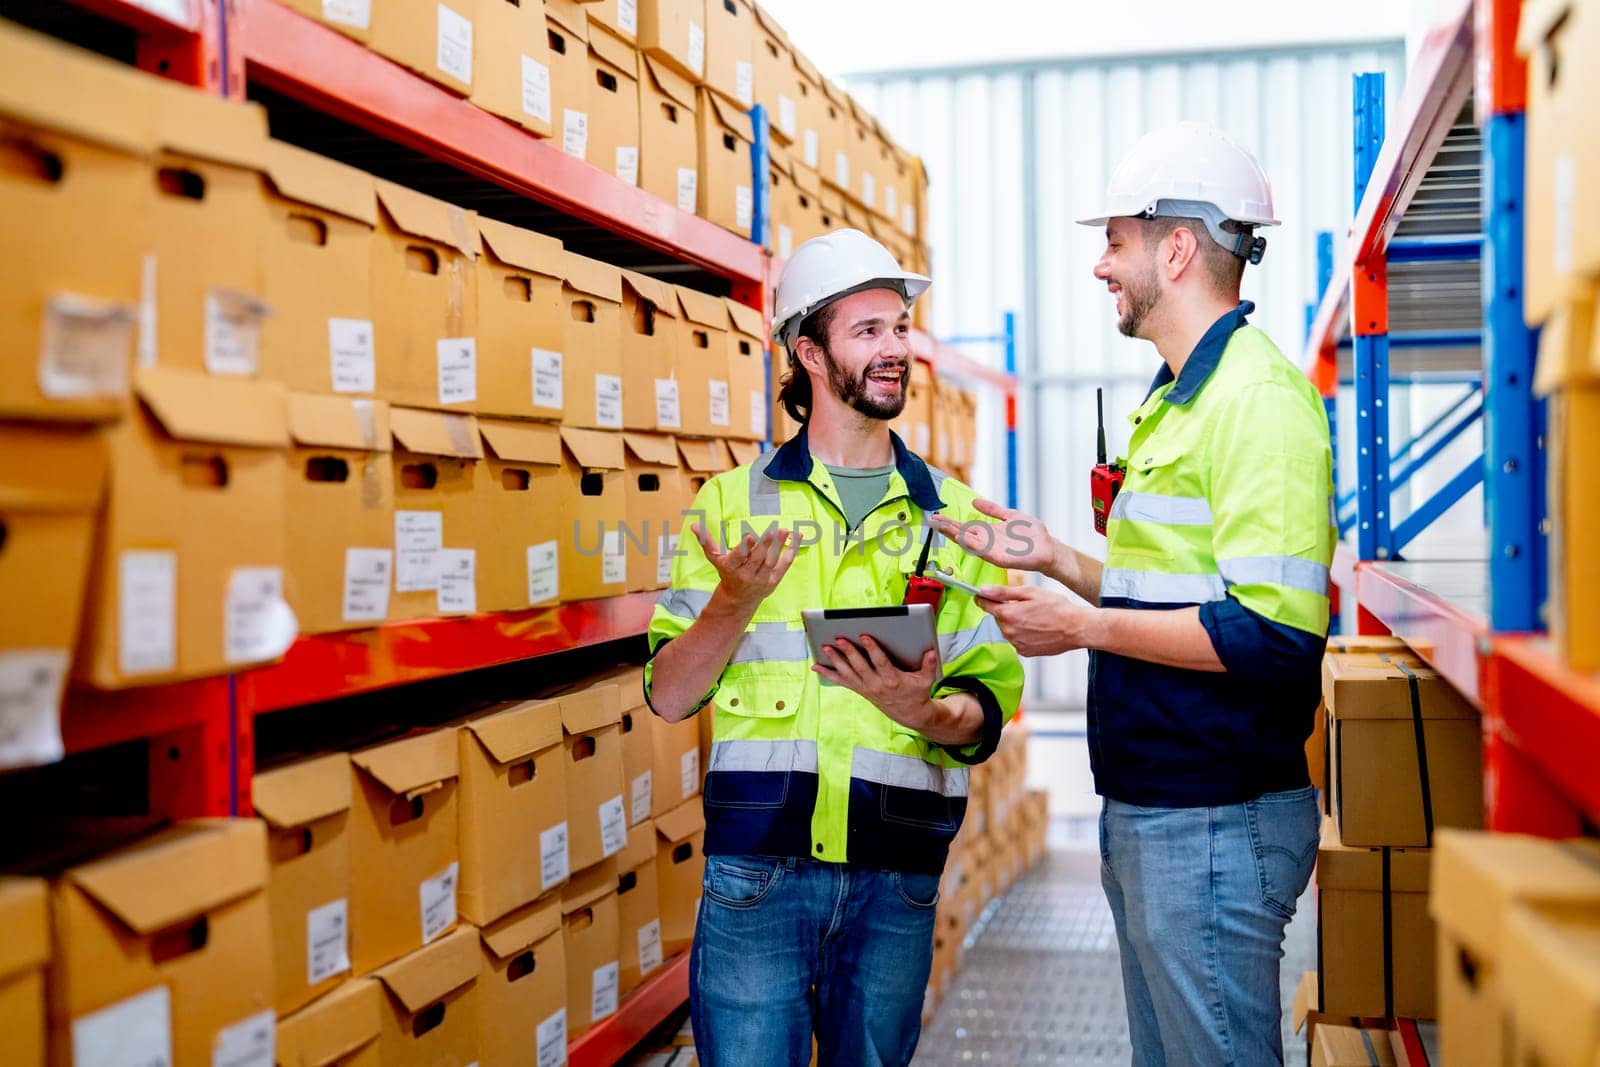 Two professional warehouse worker men discuss about work and stay between shelves with product in workplace and they look happy.